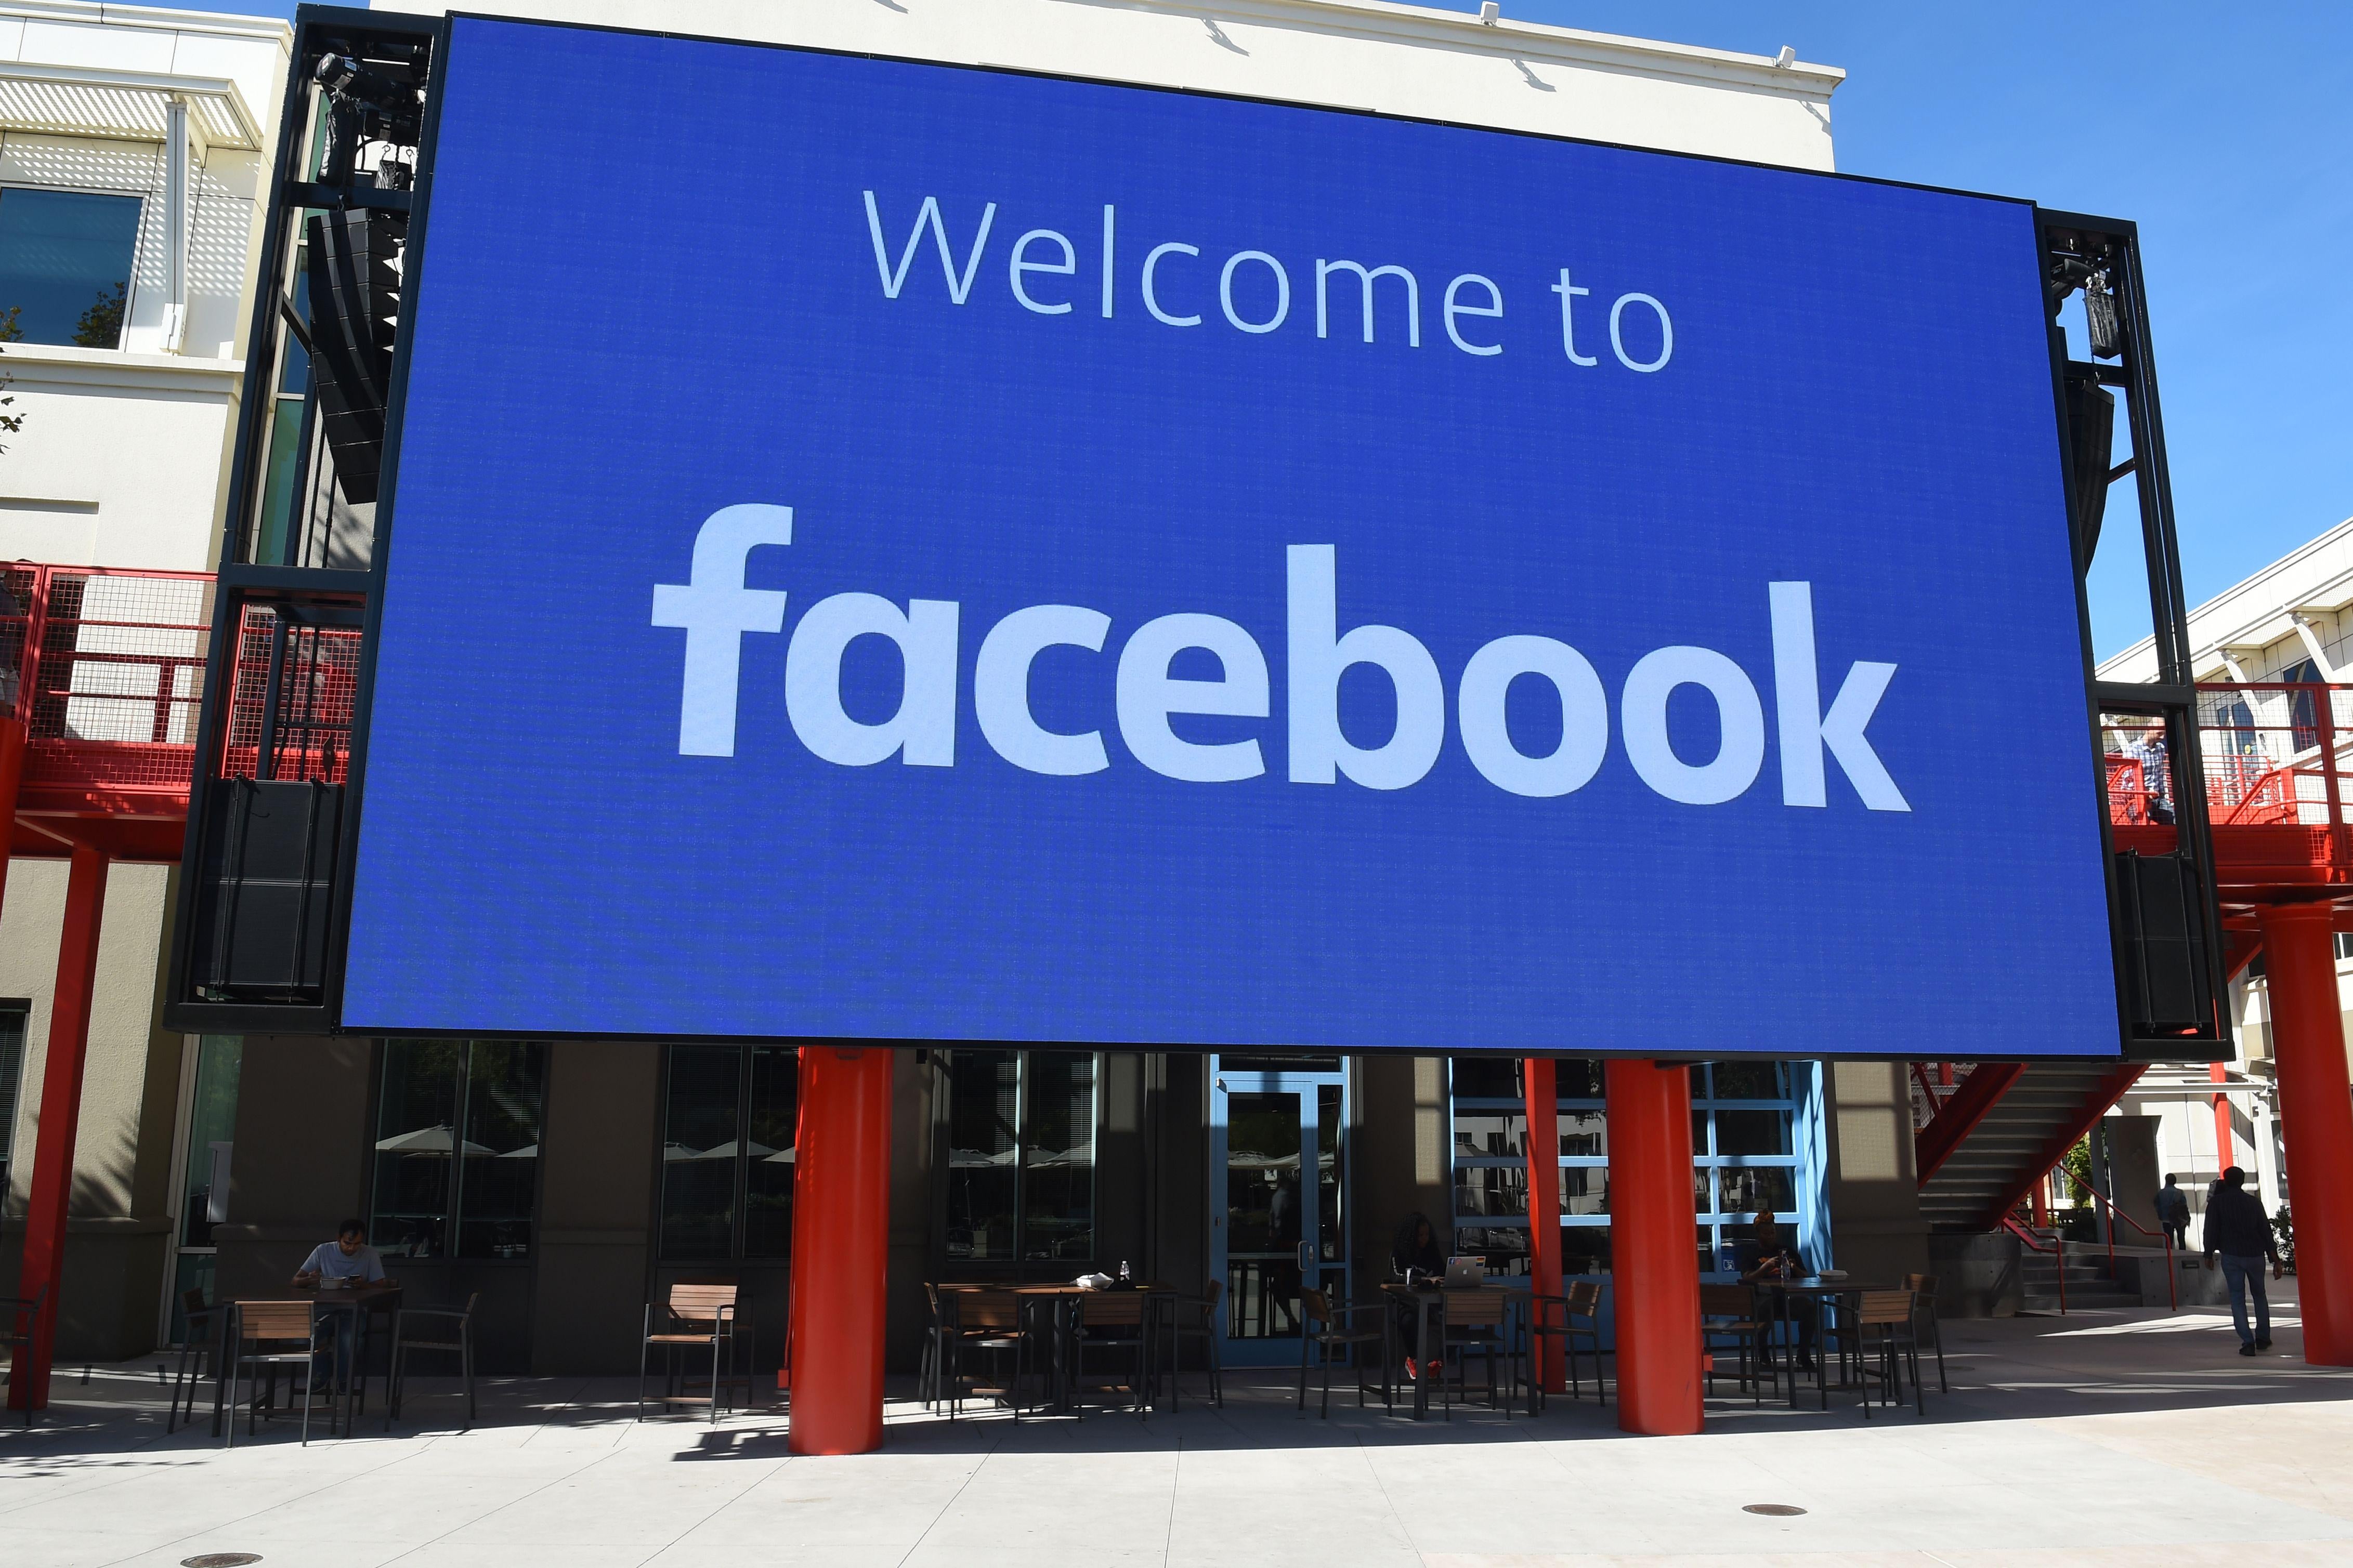 A large blue sign reads "Welcome to Facebook."